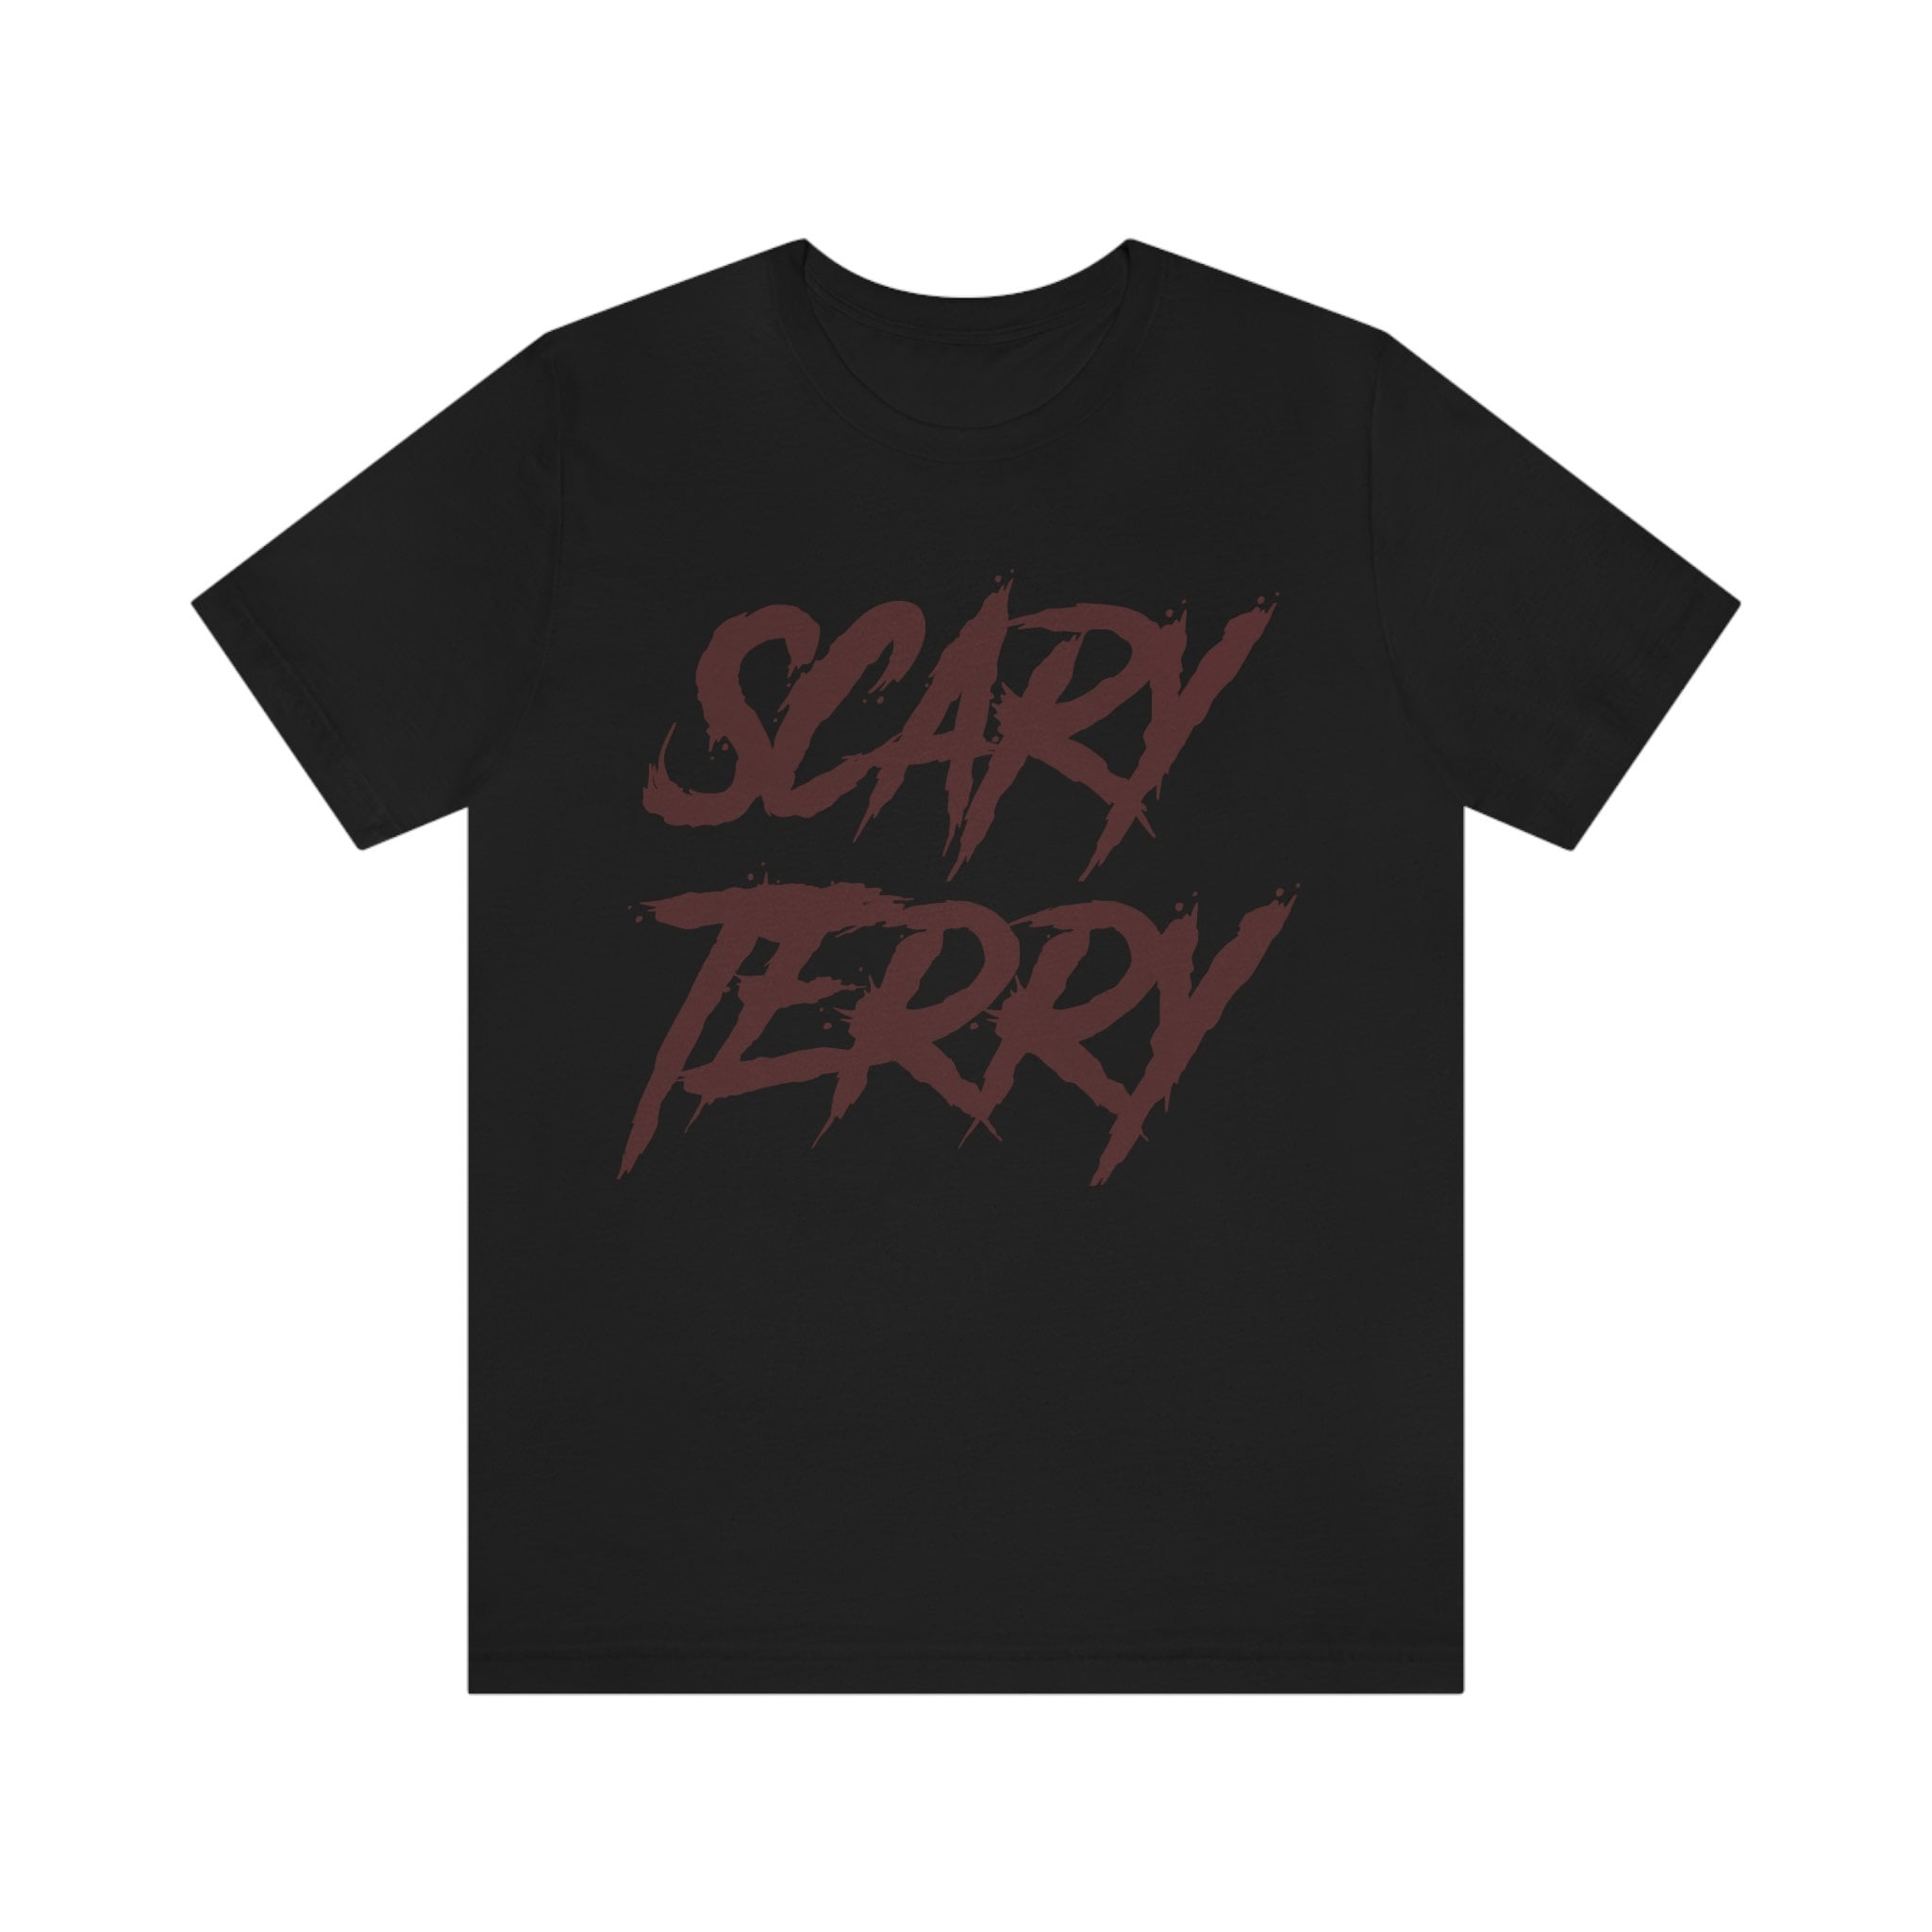 Splattered Scary Terry | Essential T-Shirt